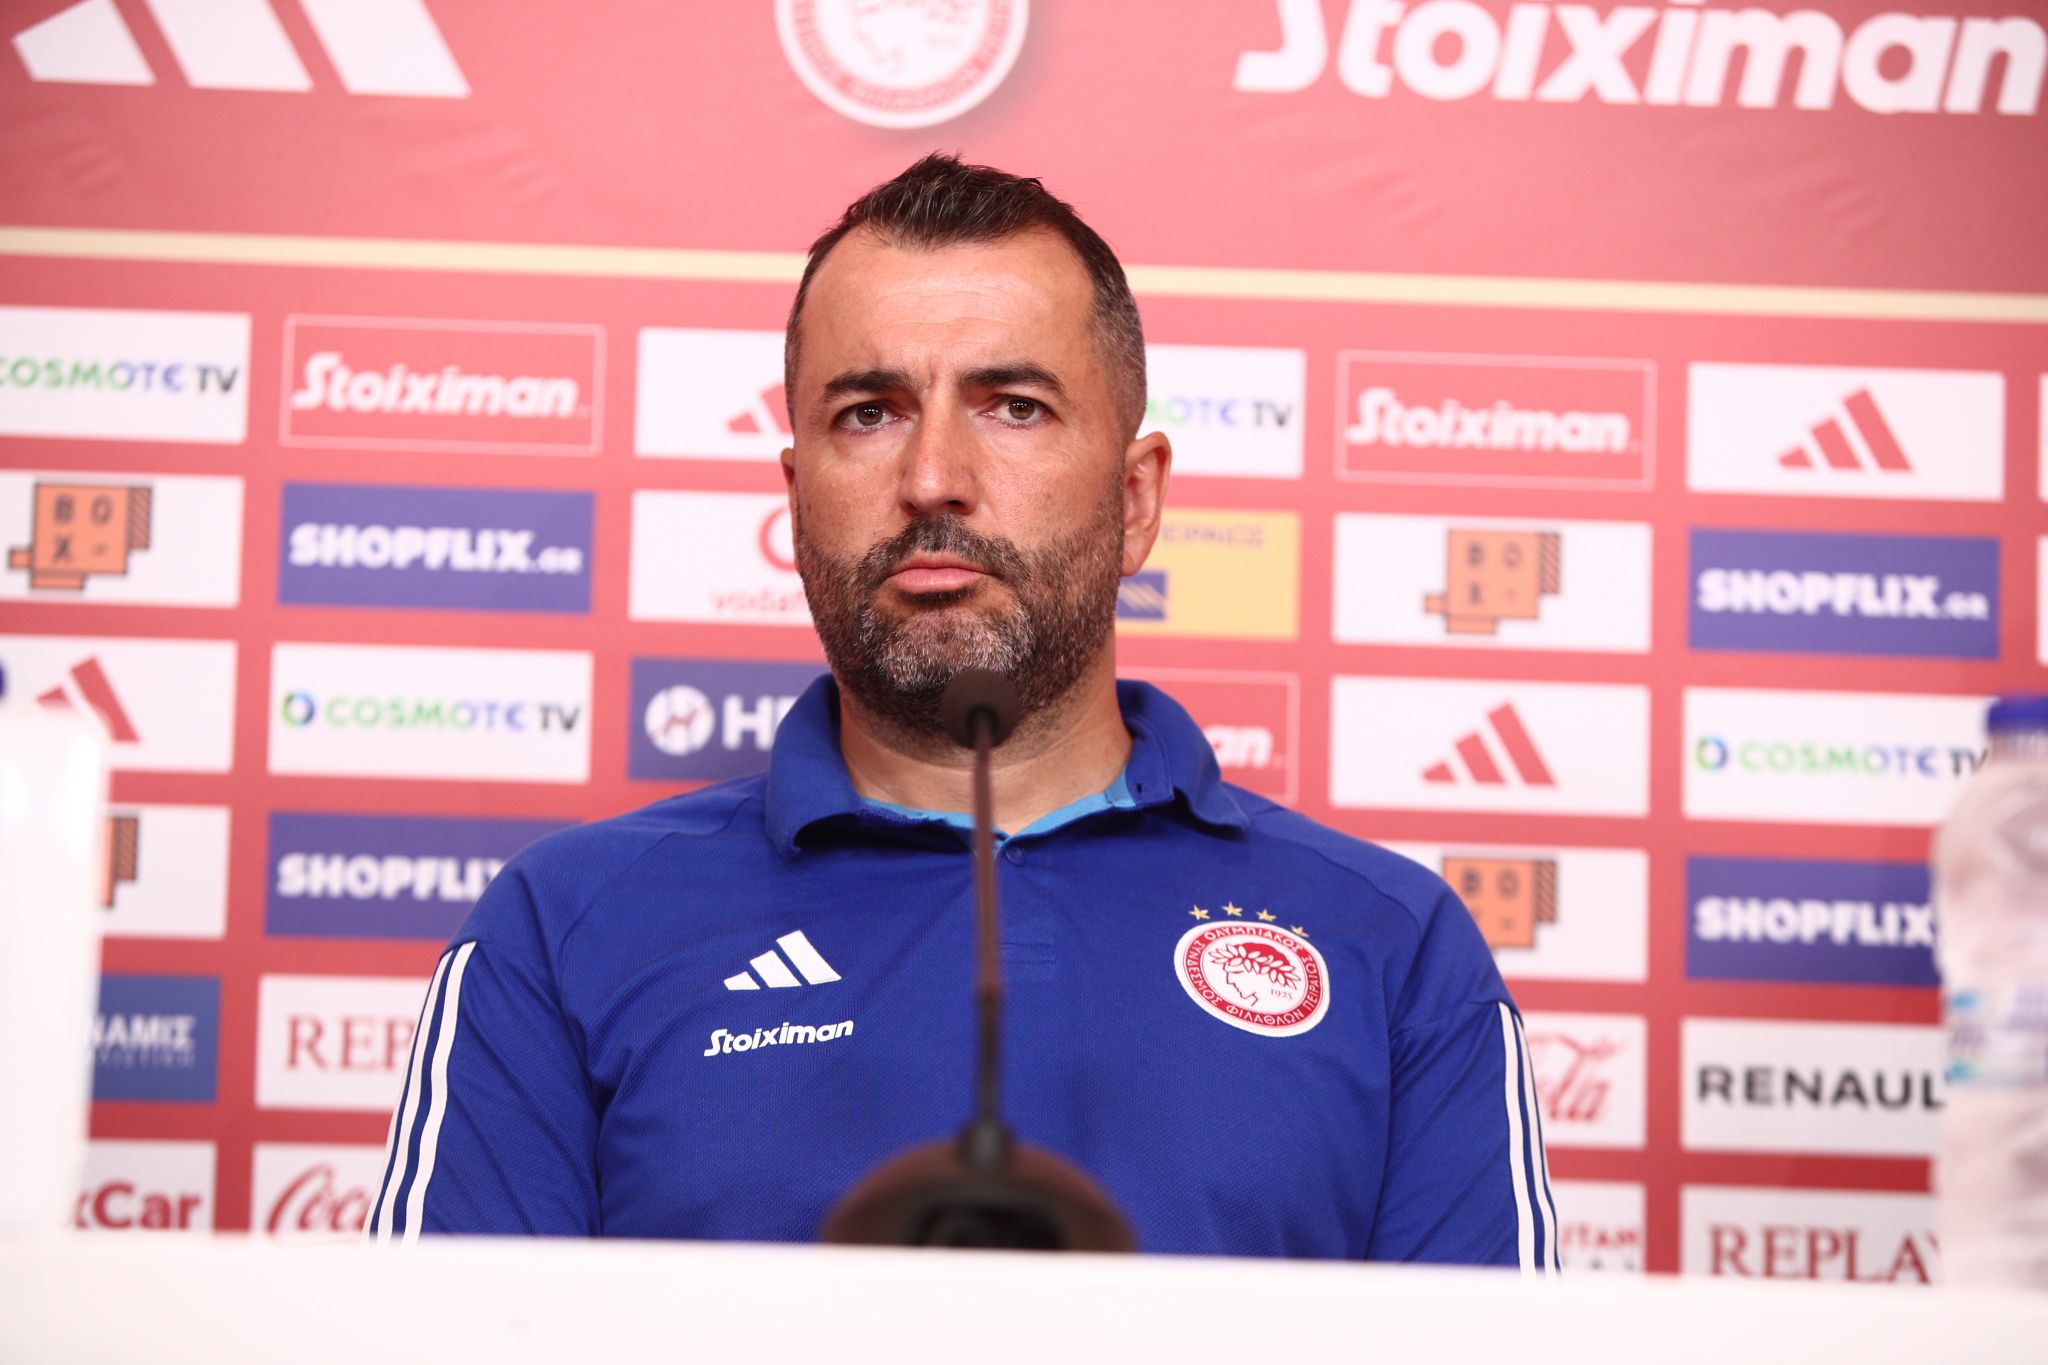 The press conference ahead of the match Olympiacos–Genk